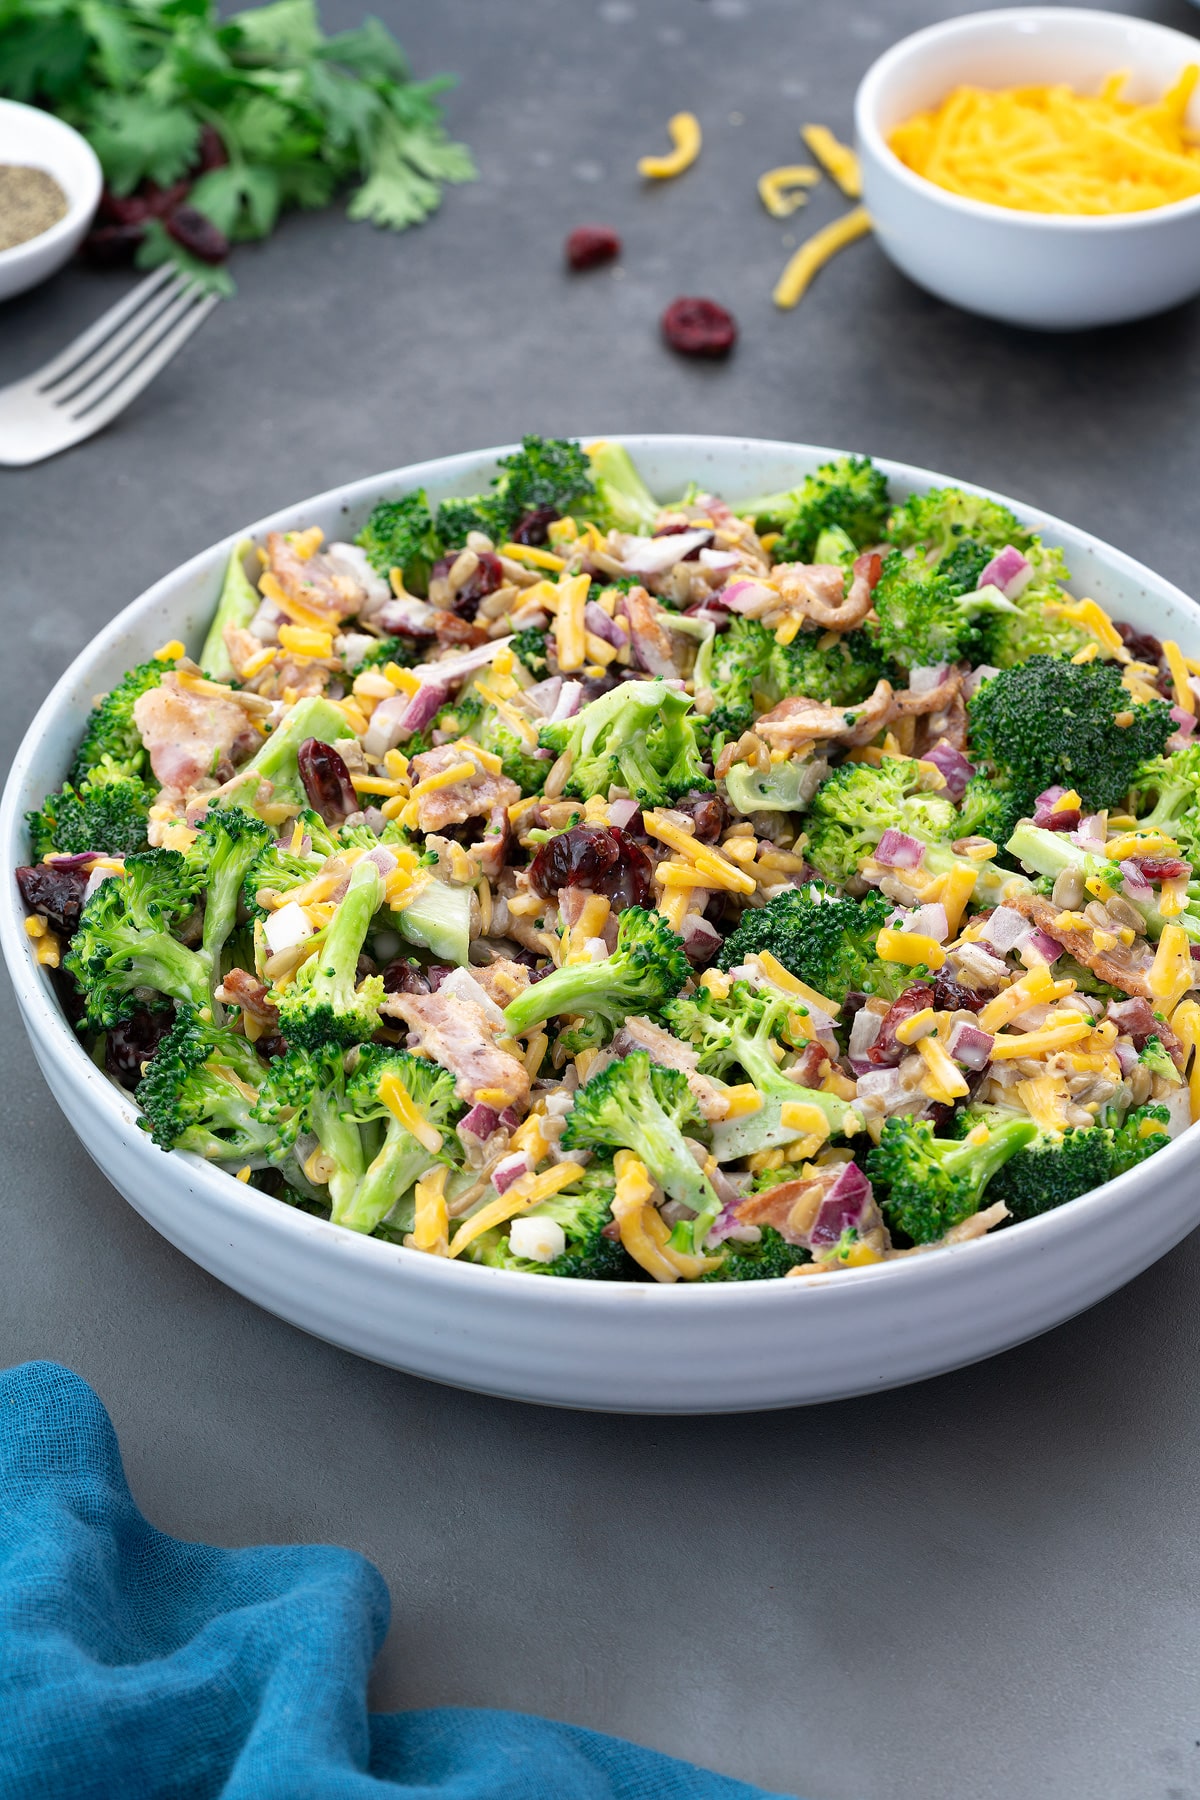 Broccoli salad in a white bowl on a grey table, made with broccoli, cheddar cheese, sunflower seeds, bacon, cranberries, and mayo. Additional cheddar cheese and greens on the table.